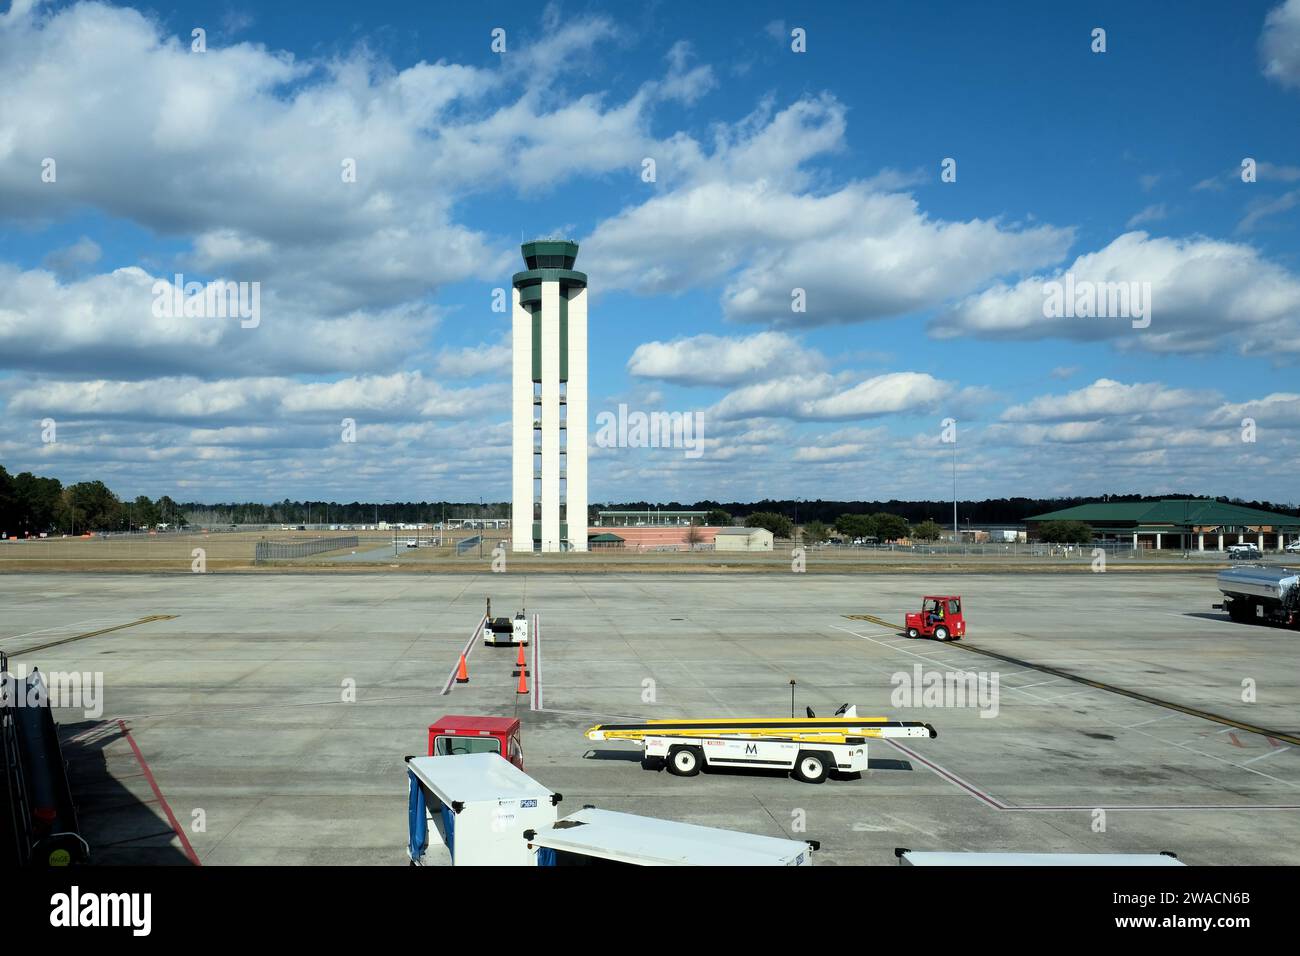 Air traffic control tower with service vehicles on jetway and tarmac at Savannah-Hilton Head Airport in Savannah, Georgia, USA. Stock Photo